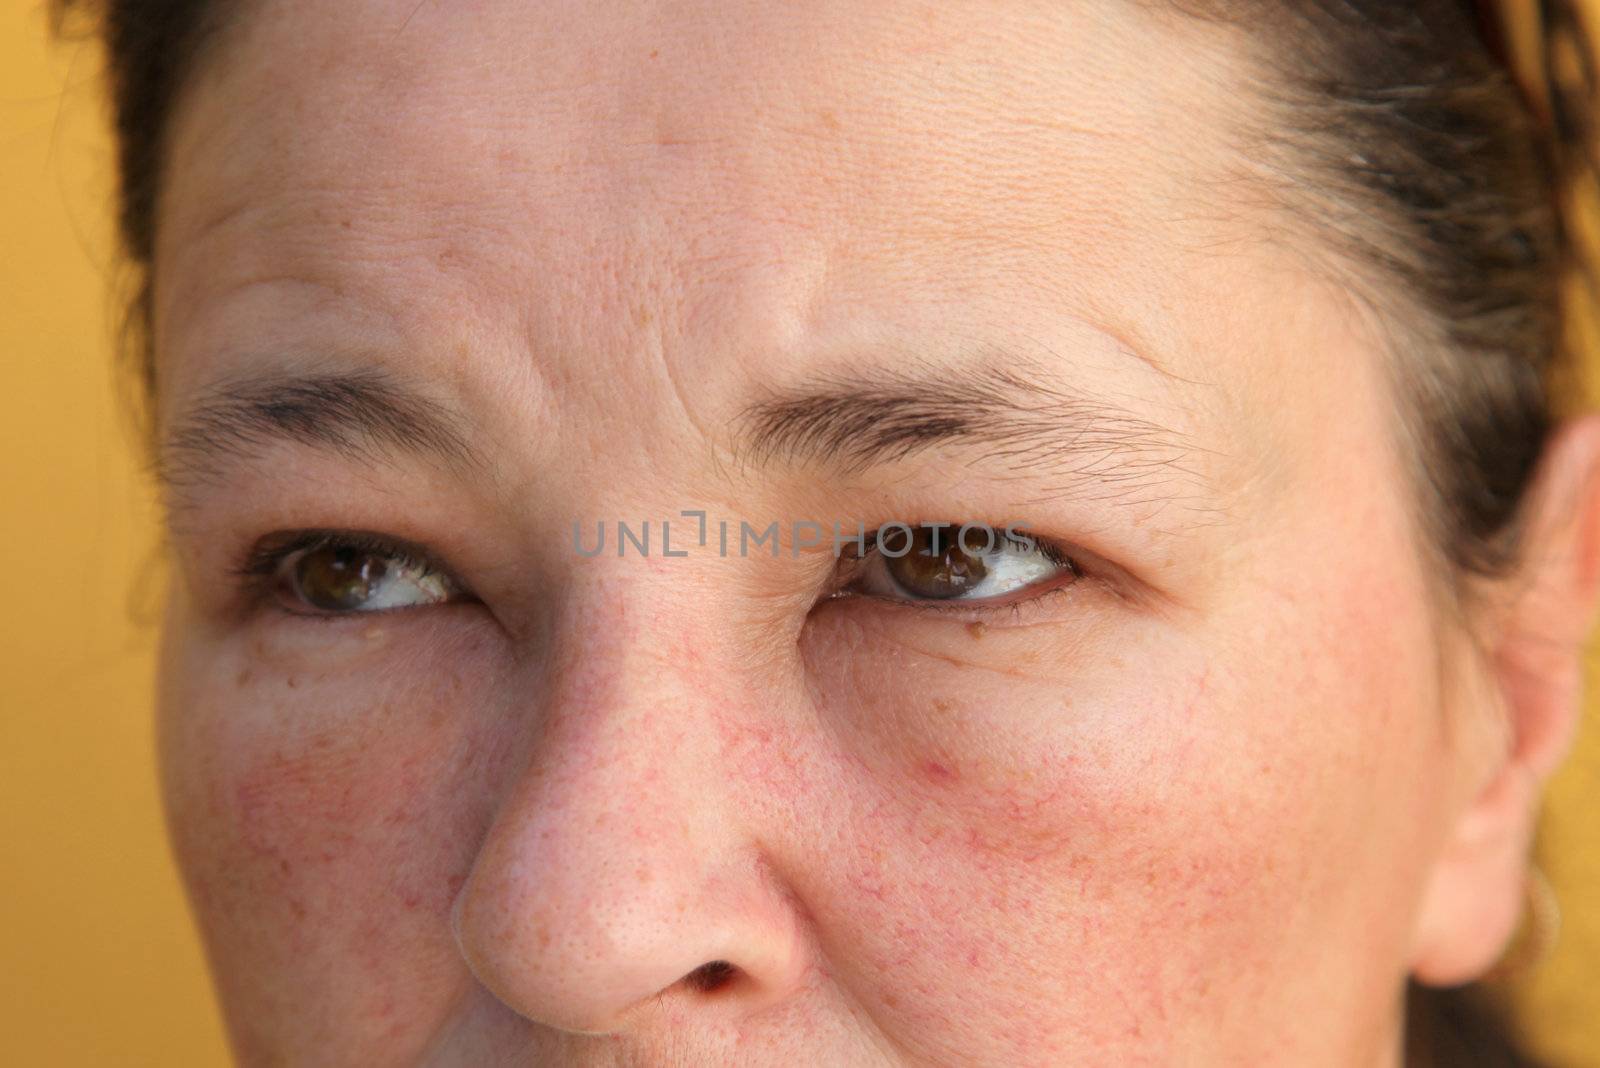 Allergies - swollen eyes and face - close-up